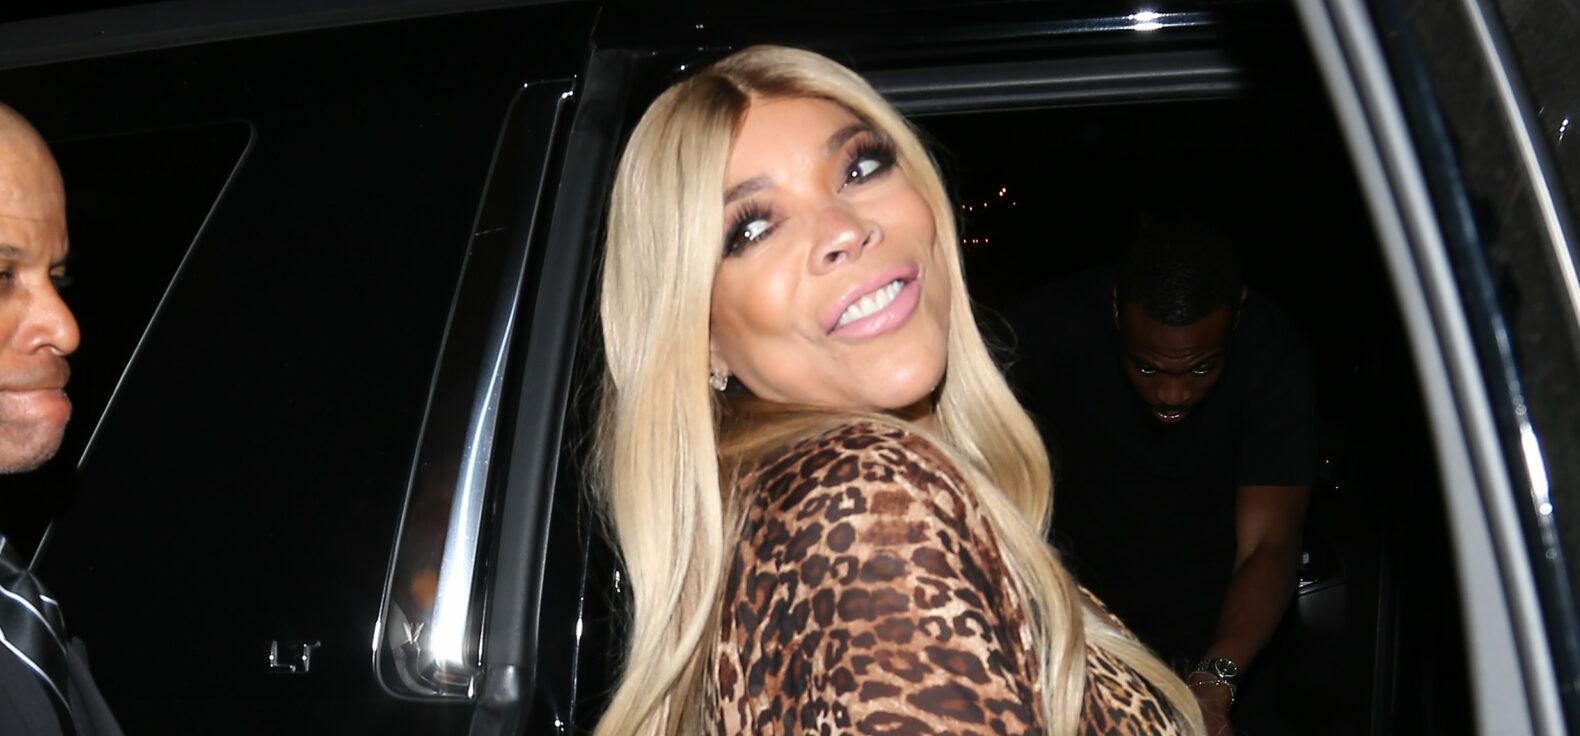 Wendy Williams wears a full-length Leopard Print dress as she left dinner at apos Catch apos Restaurant in West Hollywood CA